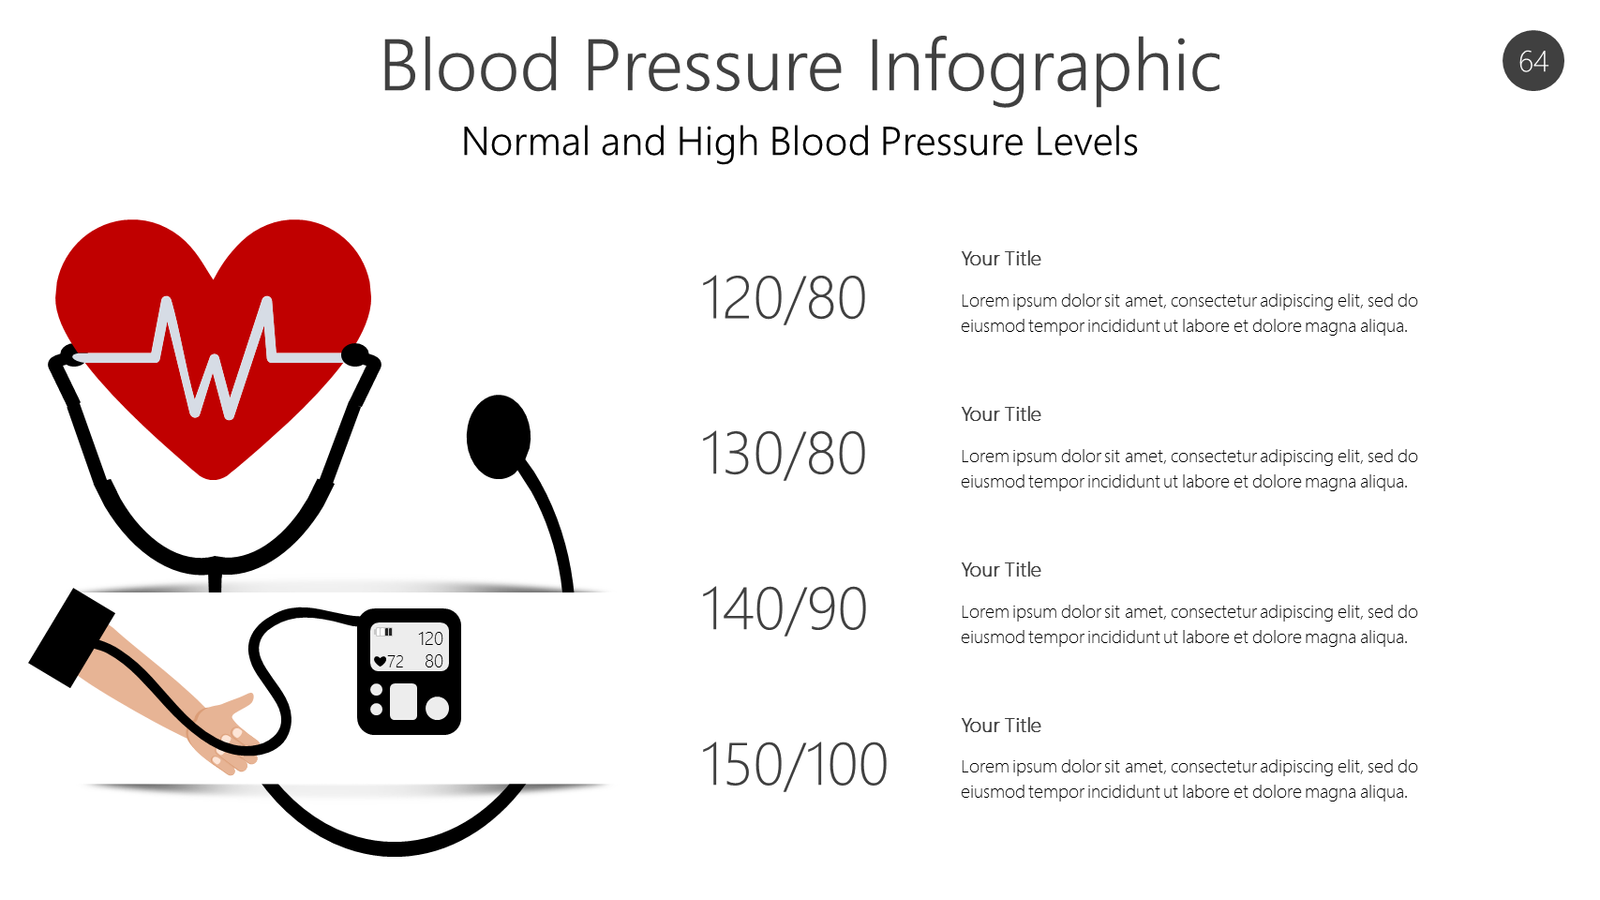 https://pptinfographics.com/wp-content/uploads/2021/07/Health-Medical-Infographic-60-Blood-Pressure-Infographic-2.png